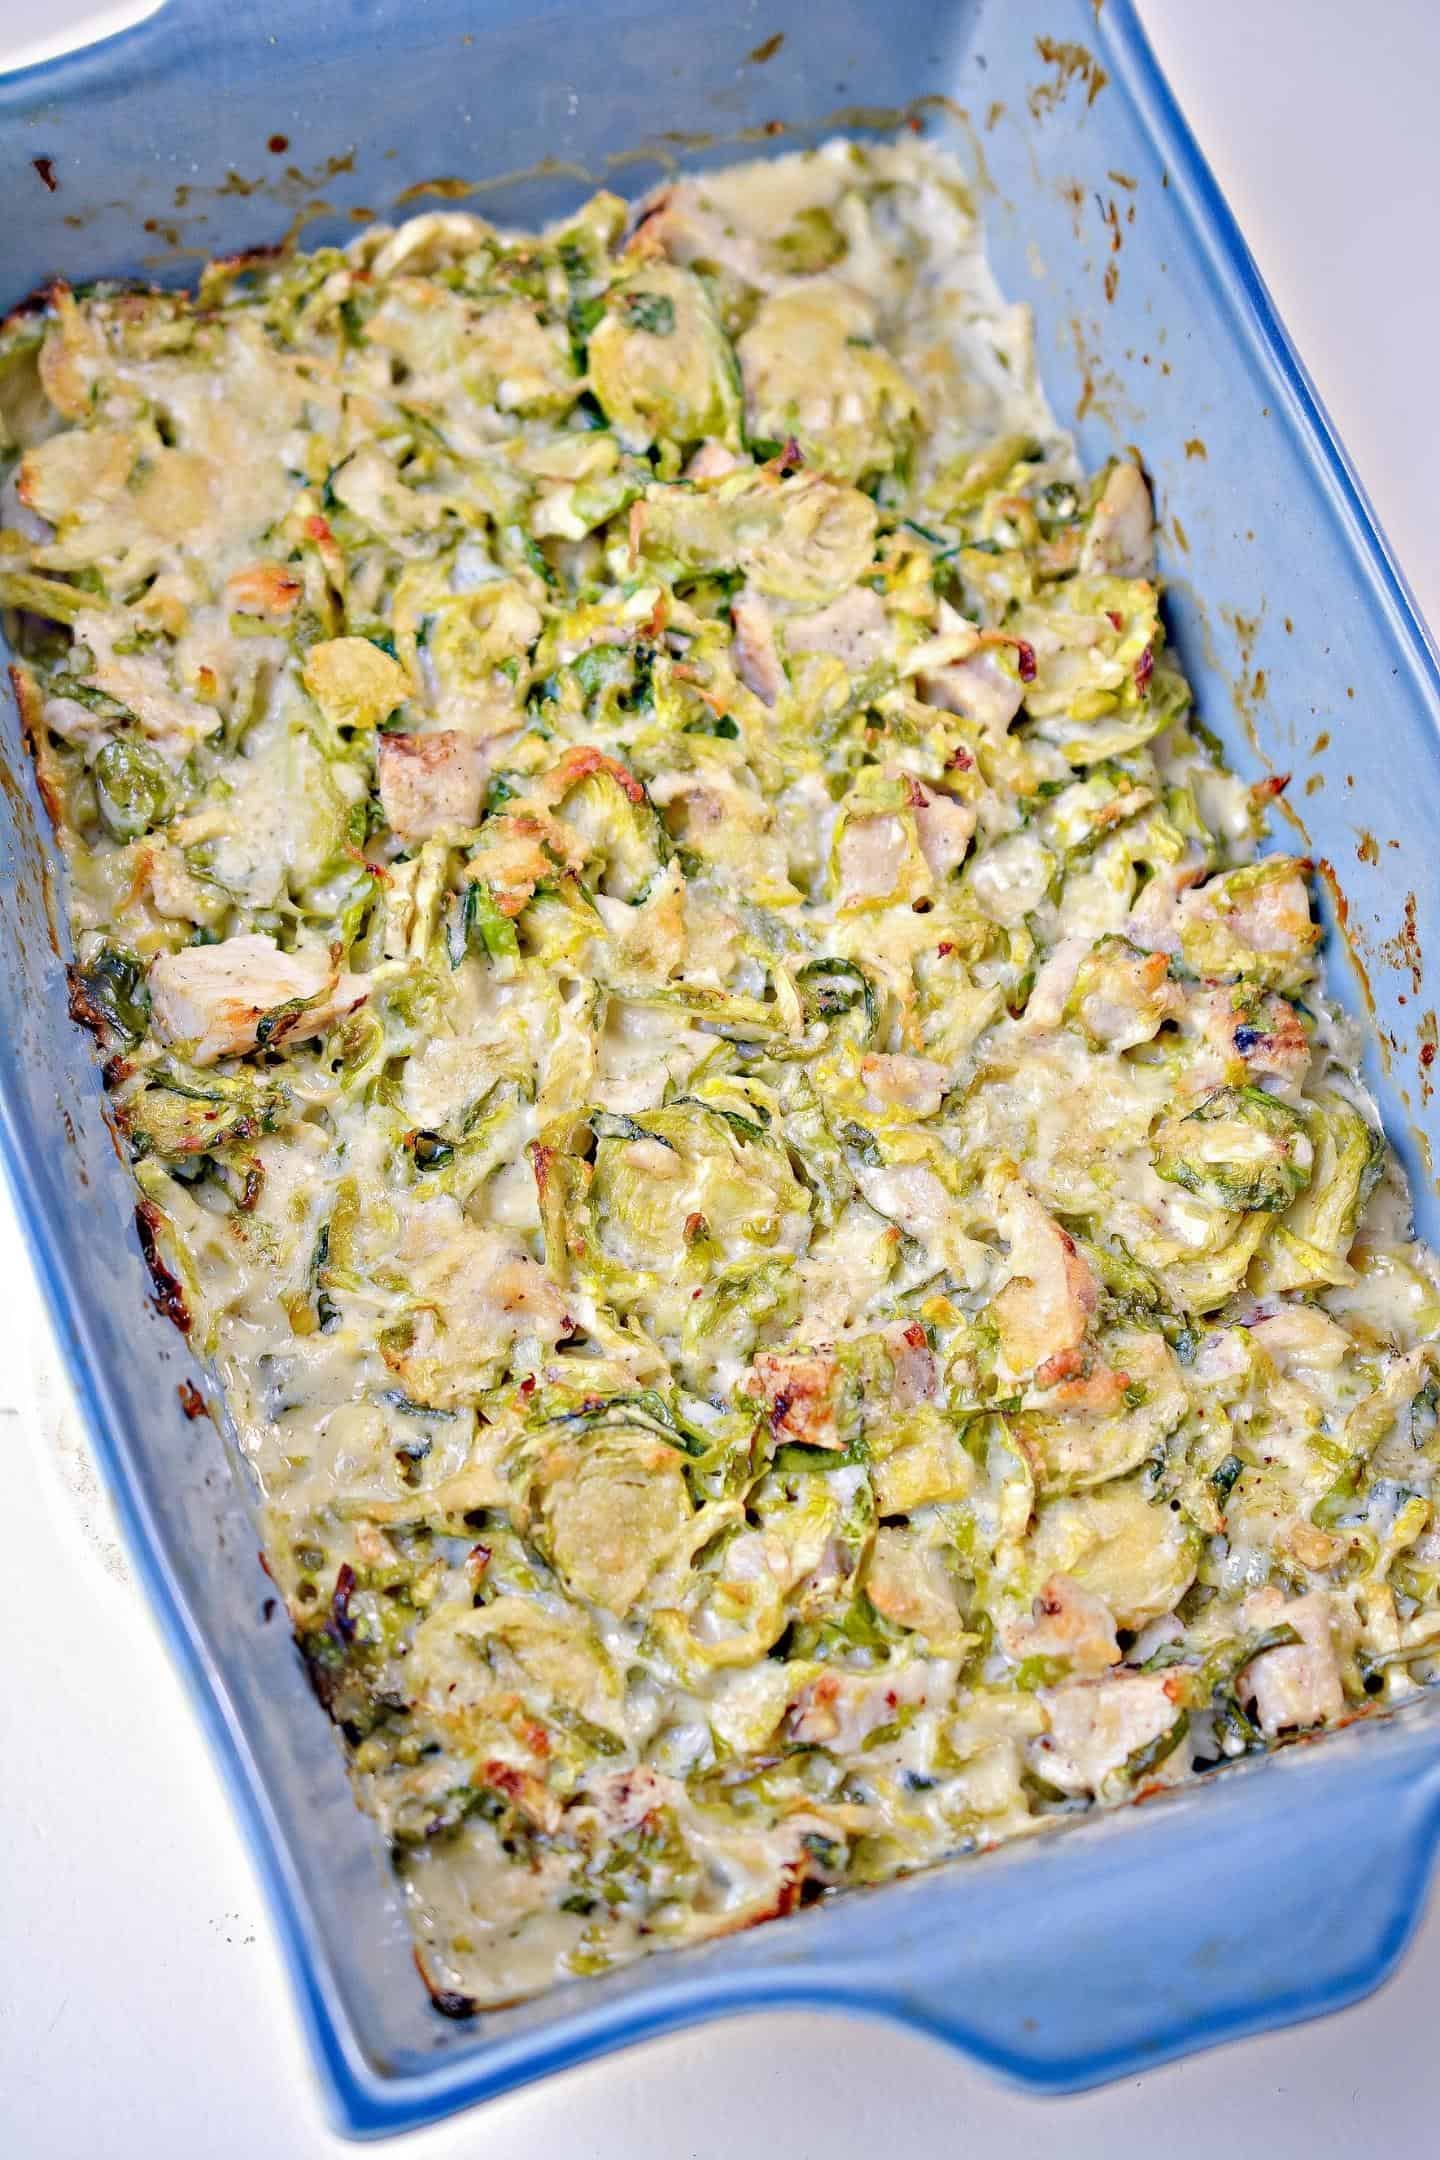 Baked brown chicken brussel sprouts